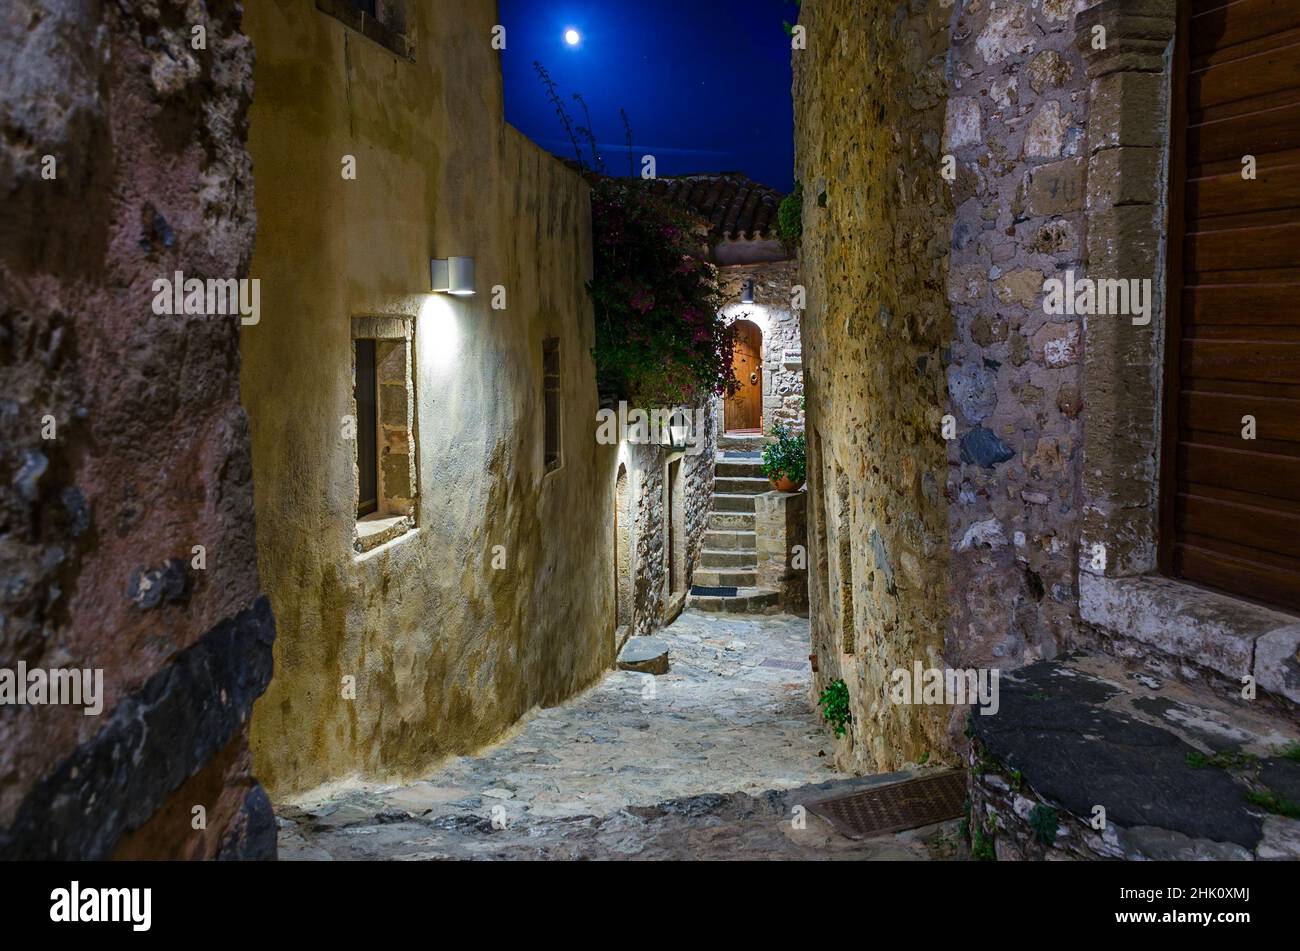 Beautiful Alley in Medieval Castle Town of Monemvasia Island, Greece at Night. Picturesque Street with Stone Houses from Byzantine Era. Stock Photo